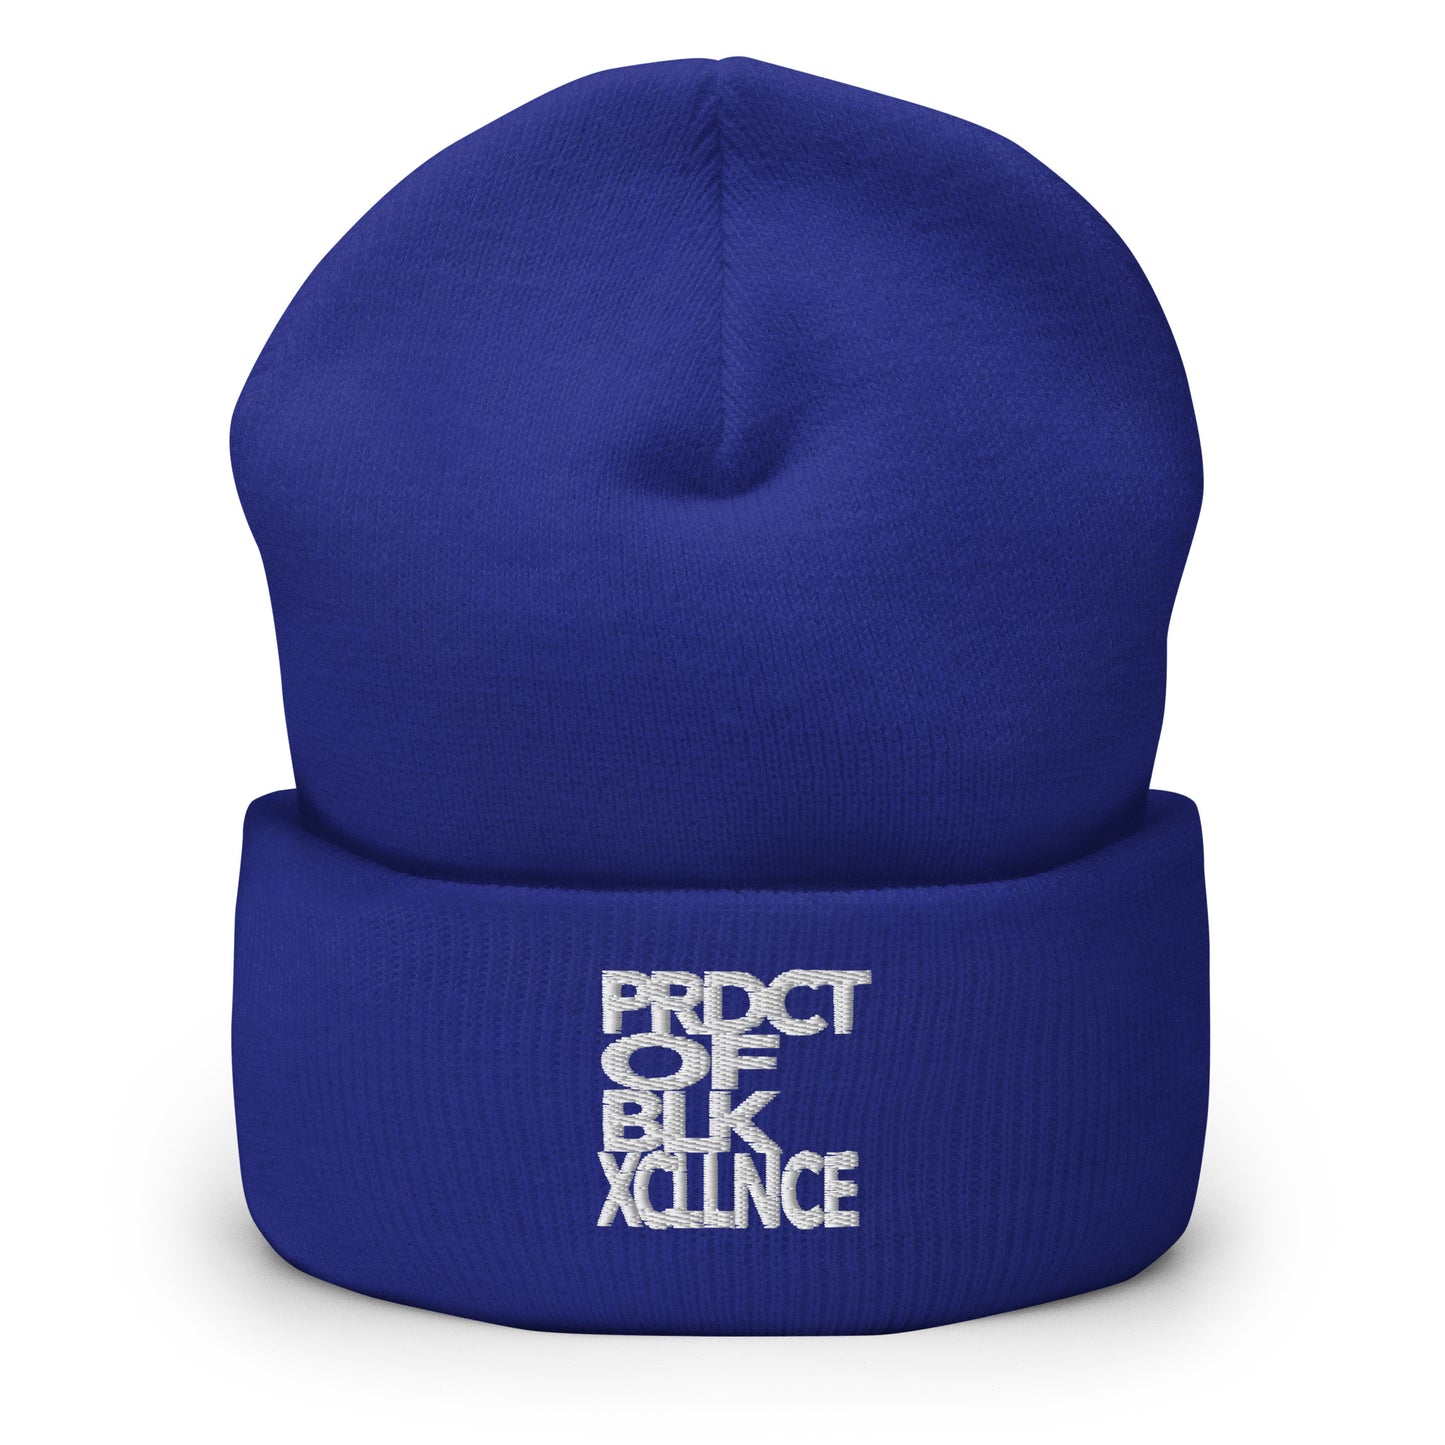 "Product of Black Excellence" Beanie